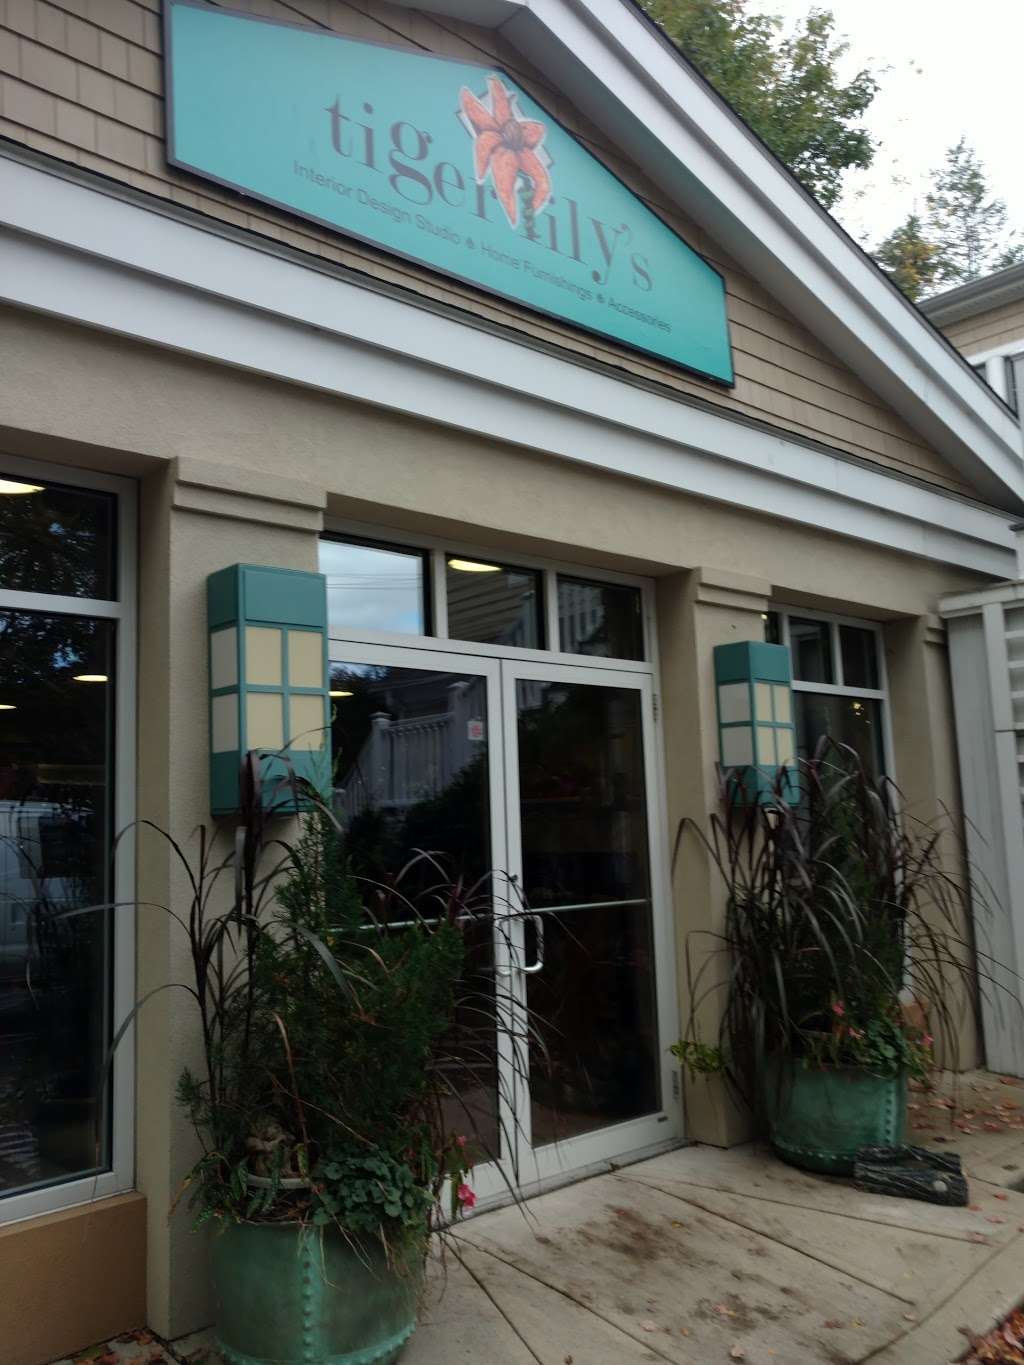 Tiger Lilys | 154 Prospect St, Greenwich, CT 06830 | Phone: (203) 629-6510